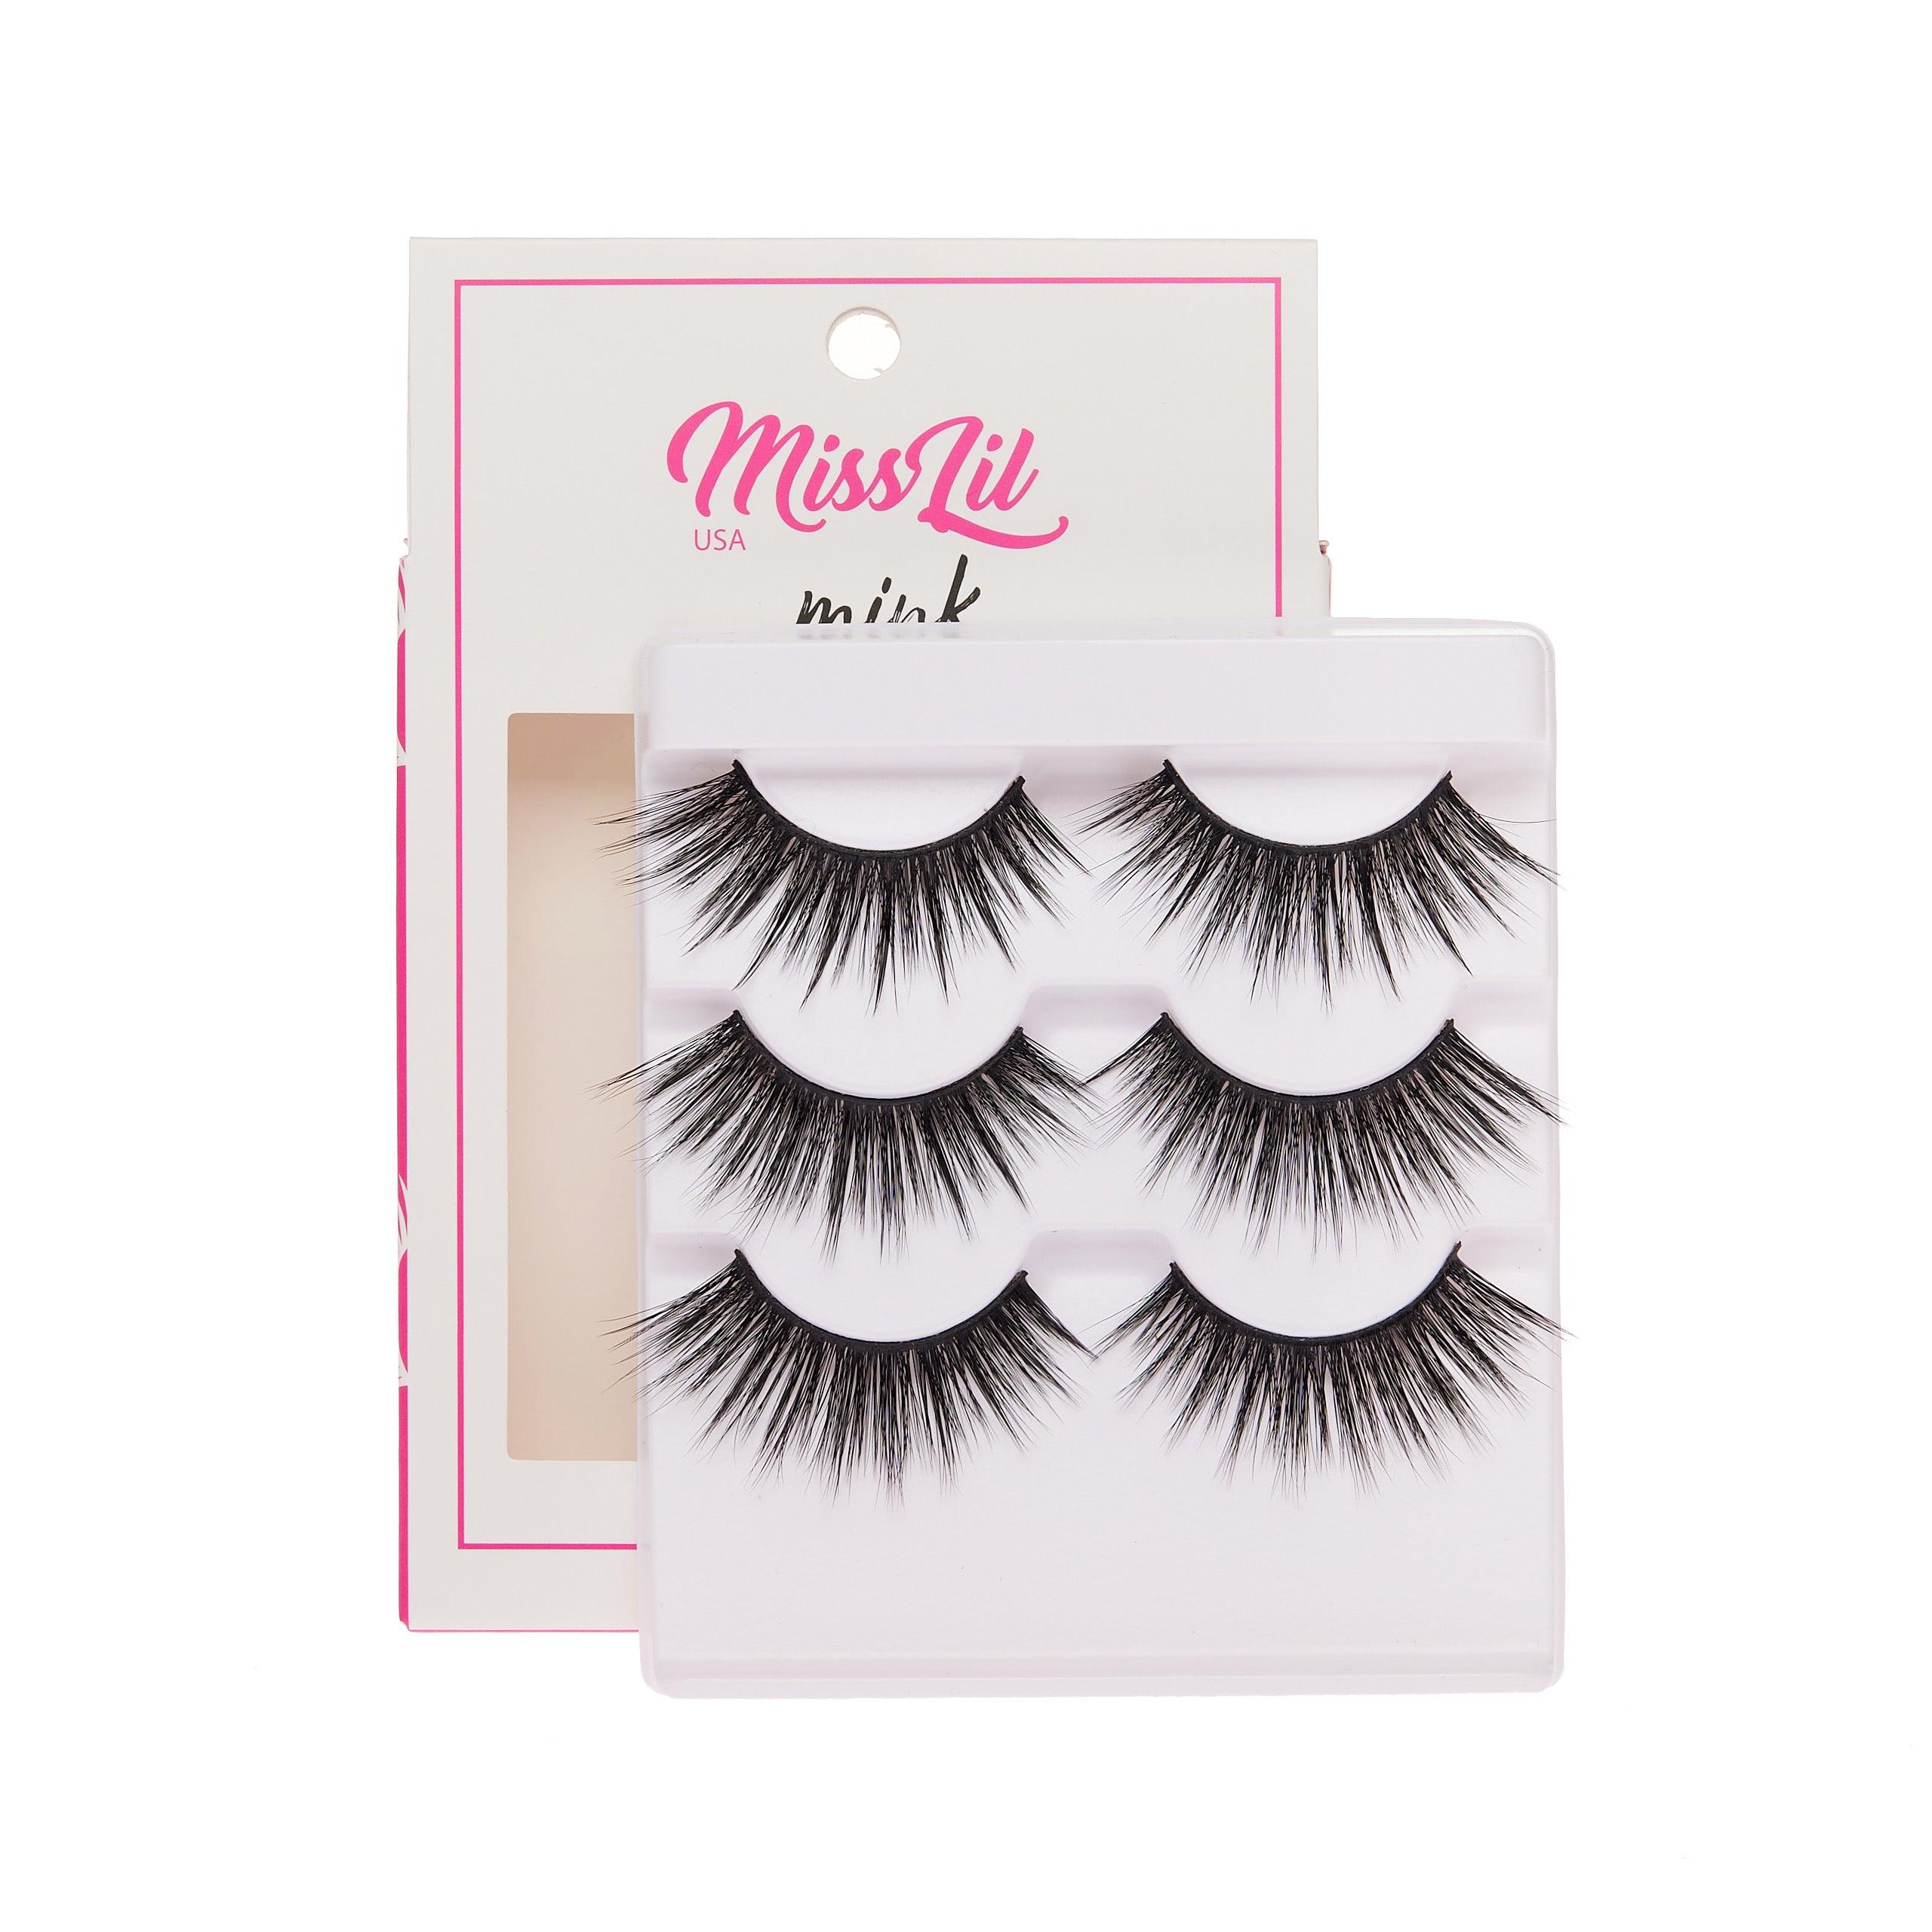 3-Pair Faux Mink Effect Eyelashes - Lash Party Collection #28 - Pack of 3 - Miss Lil USA